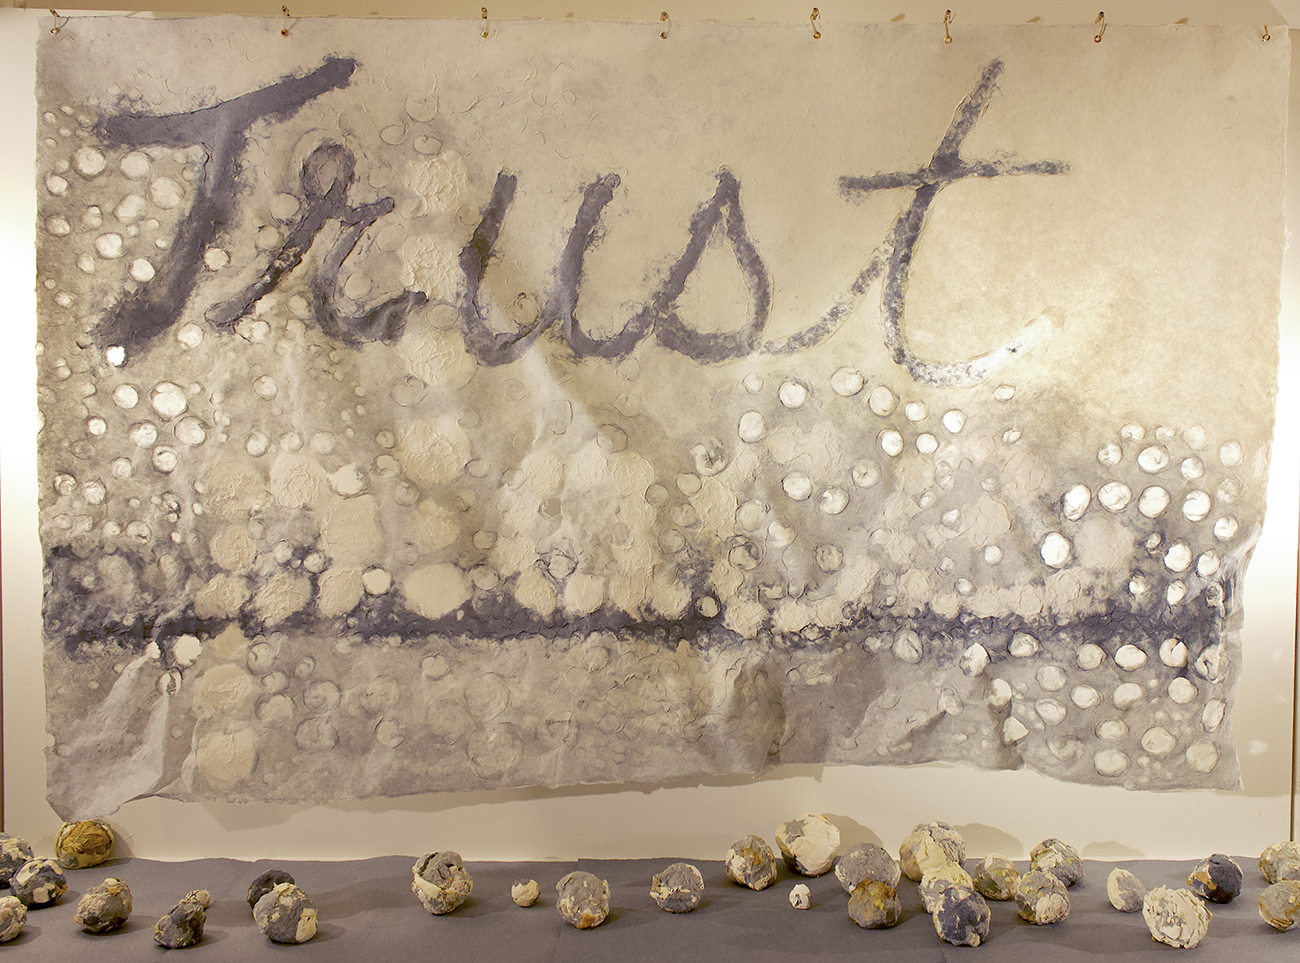 image of paper banner with the words "Trust" and "place" hung on a wall